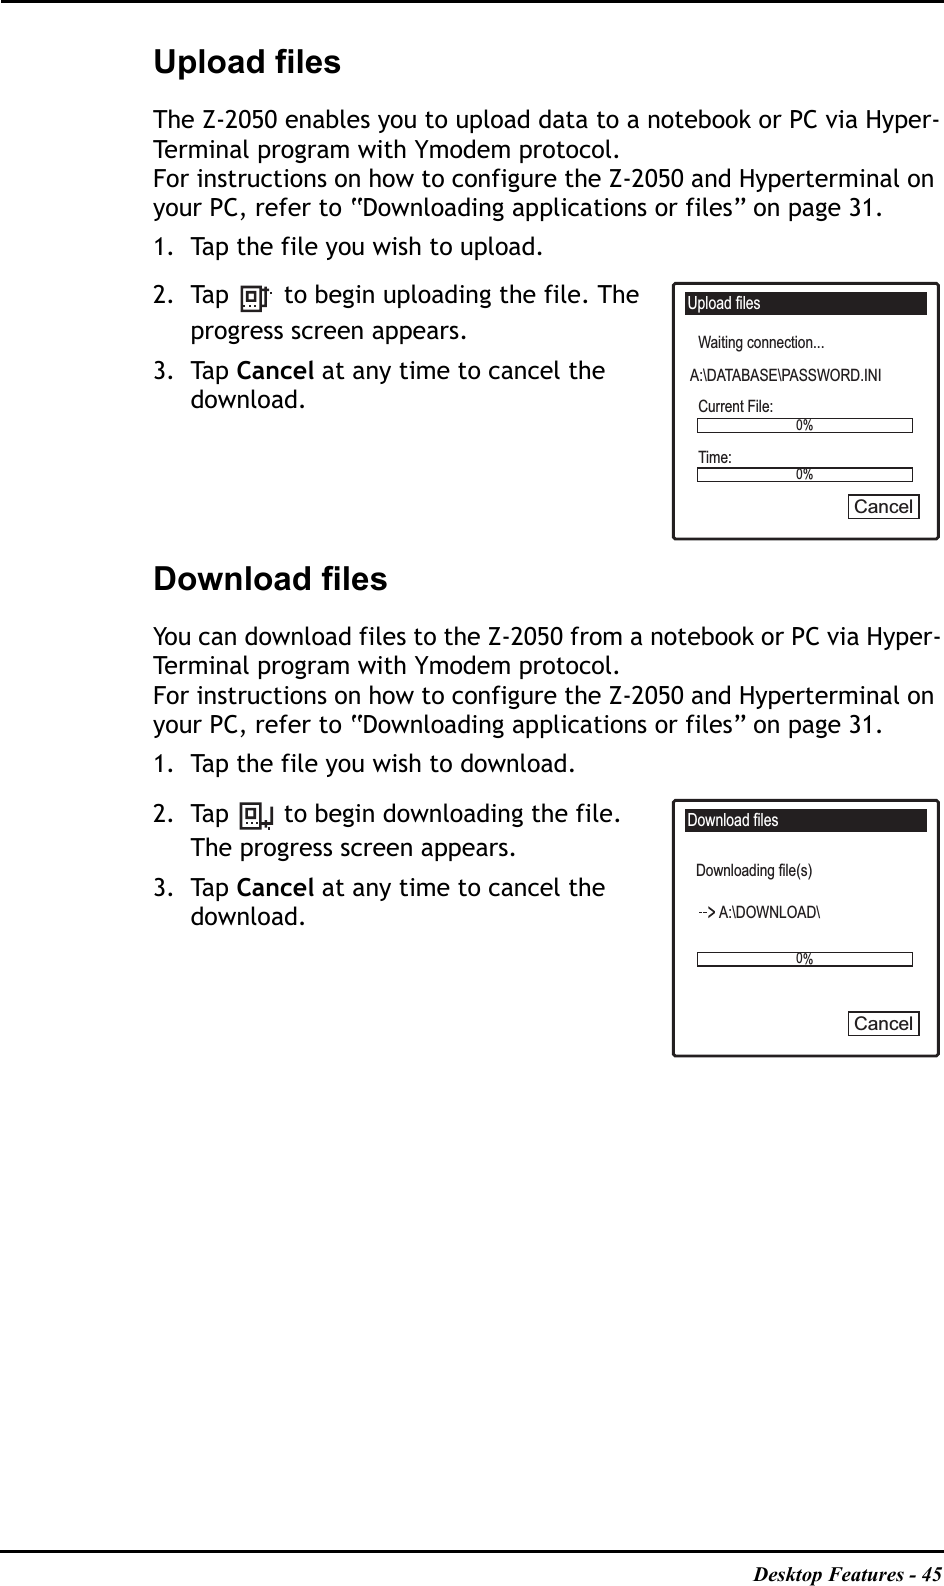 Desktop Features - 45Upload filesThe Z-2050 enables you to upload data to a notebook or PC via Hyper-Terminal program with Ymodem protocol.For instructions on how to configure the Z-2050 and Hyperterminal on your PC, refer to “Downloading applications or files” on page 31.1. Tap the file you wish to upload.2. Tap   to begin uploading the file. The progress screen appears.3. Tap Cancel at any time to cancel the download.Download filesYou can download files to the Z-2050 from a notebook or PC via Hyper-Terminal program with Ymodem protocol.For instructions on how to configure the Z-2050 and Hyperterminal on your PC, refer to “Downloading applications or files” on page 31.1. Tap the file you wish to download.2. Tap   to begin downloading the file. The progress screen appears.3. Tap Cancel at any time to cancel the download.Upload filesWaiting connection...Current File:Time:A:\DATABASE\PASSWORD.INI0%0%CancelDownload filesDownloading file(s)A:\DOWNLOAD\0%Cancel